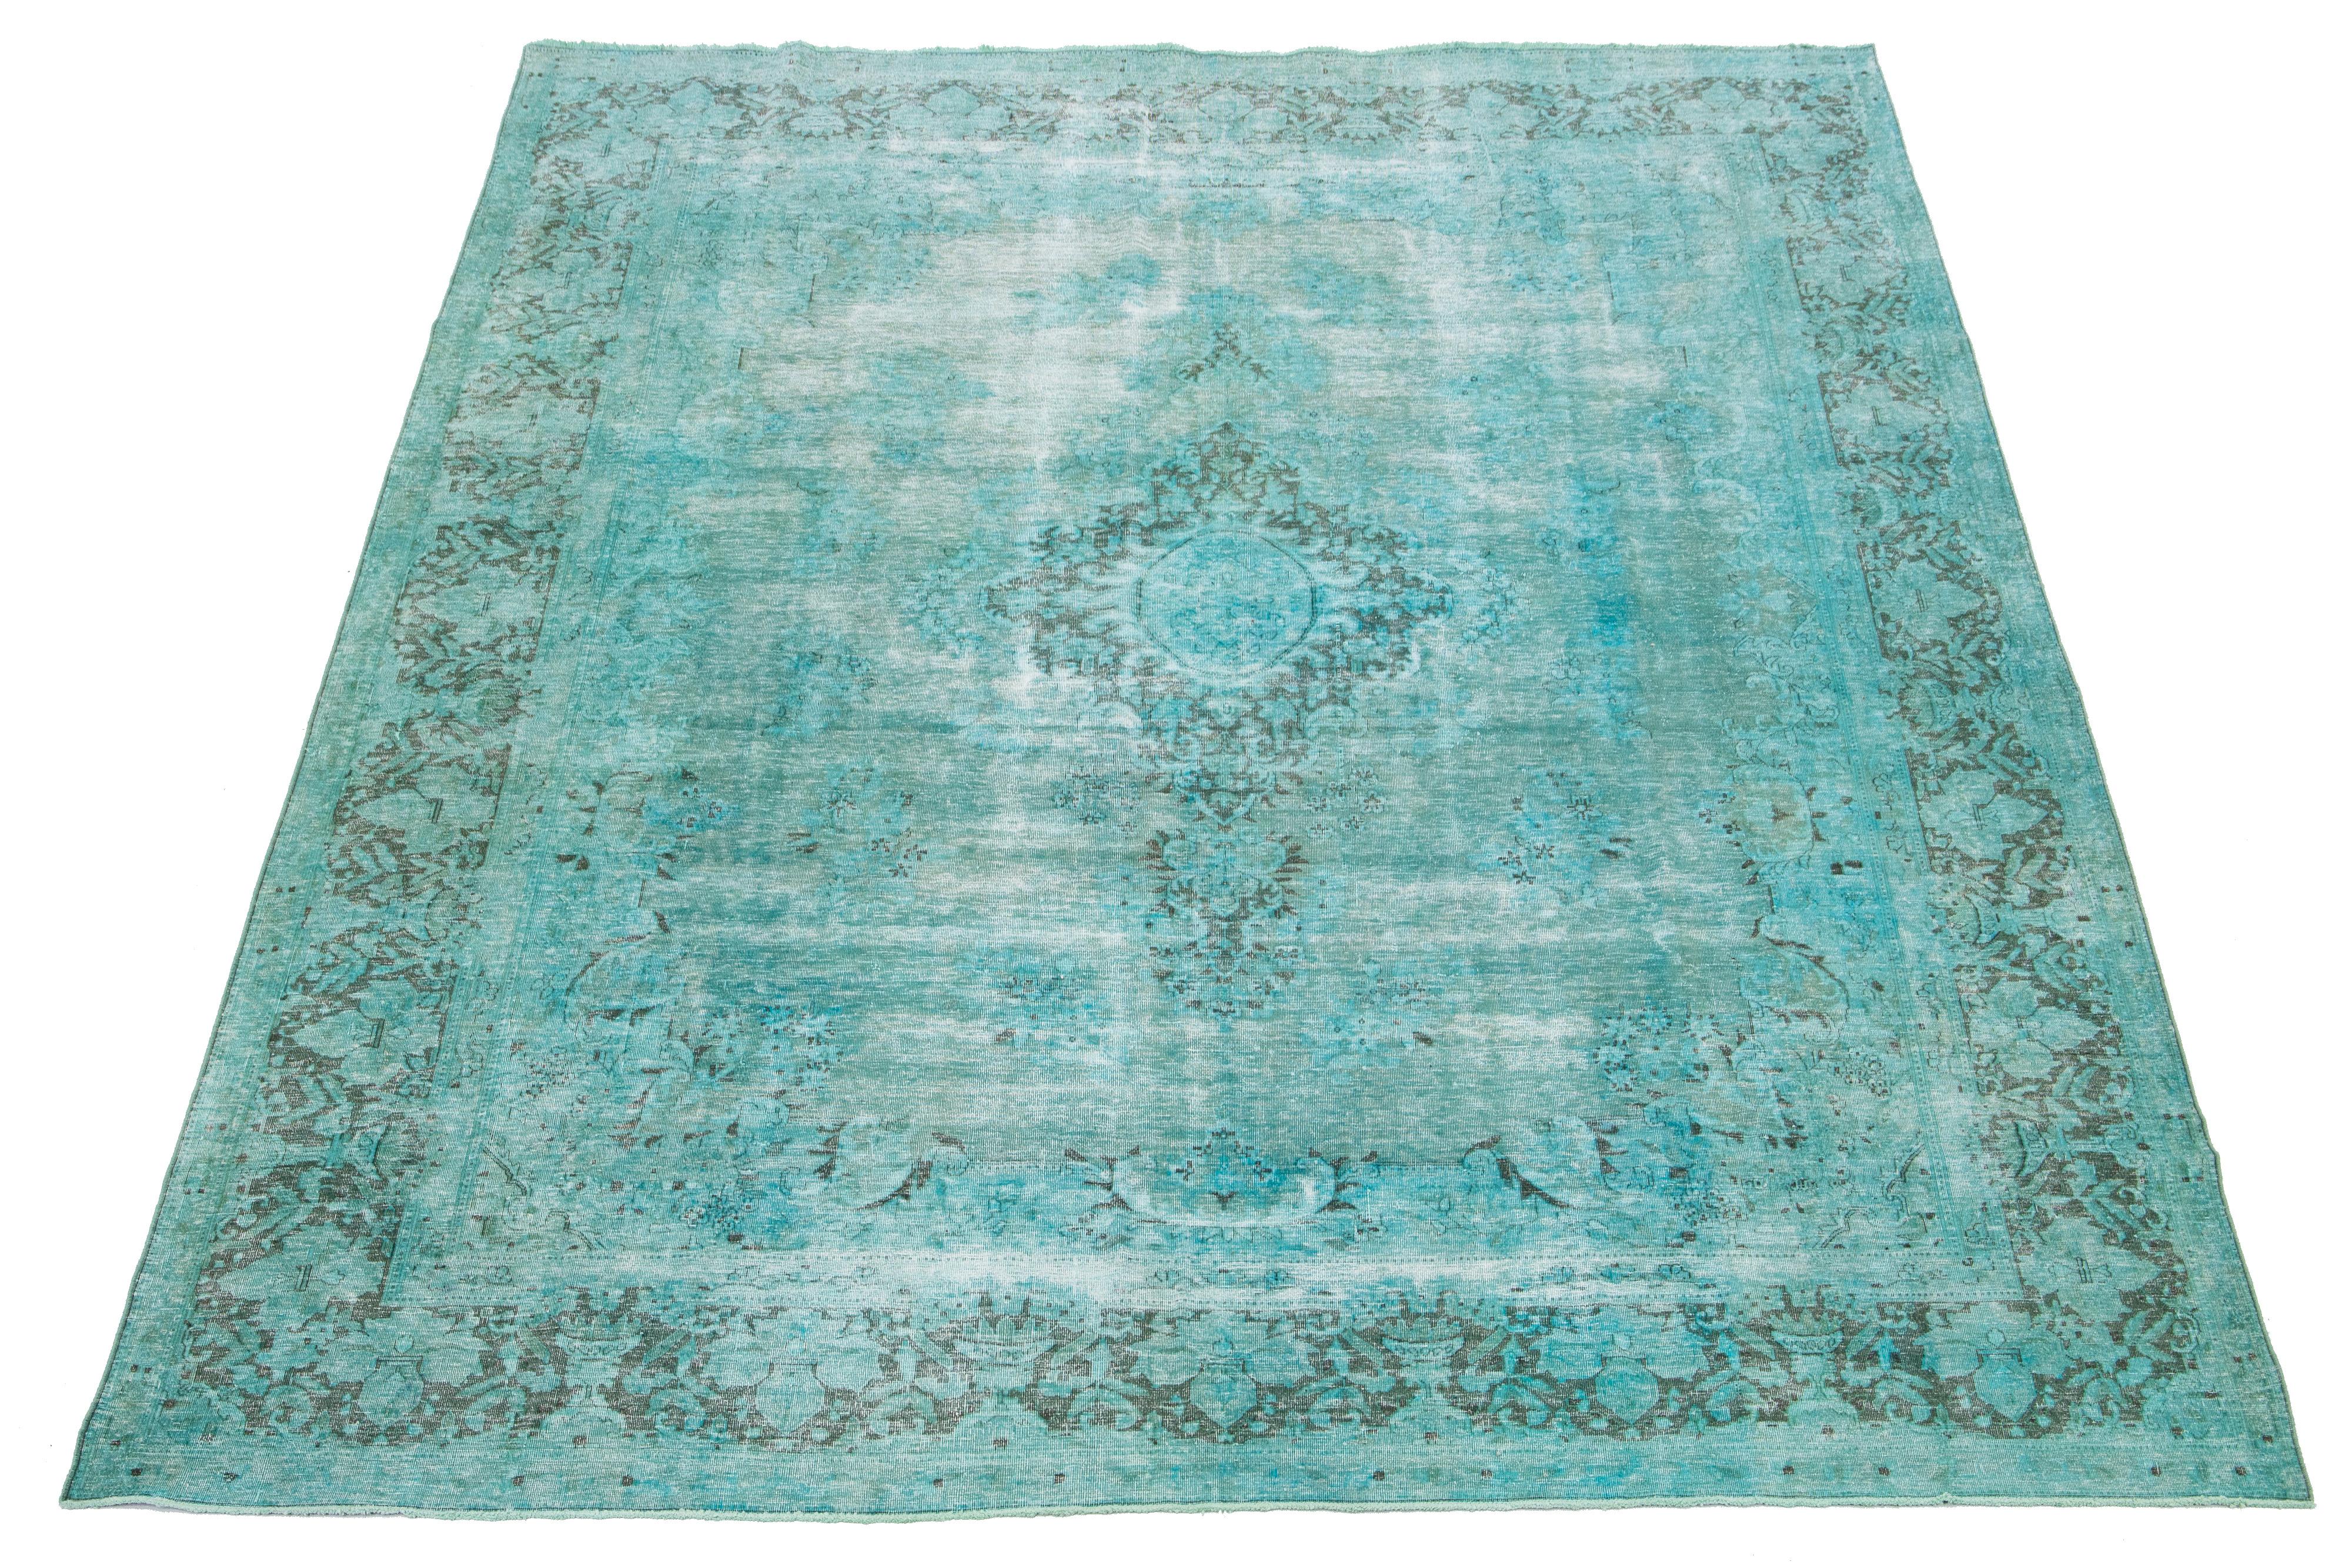 This is an antique hand-knotted wool Persian rug with a Turquoise color field. It features a medallion floral design with gray accents.

This rug measures 9'6'' x 12'10